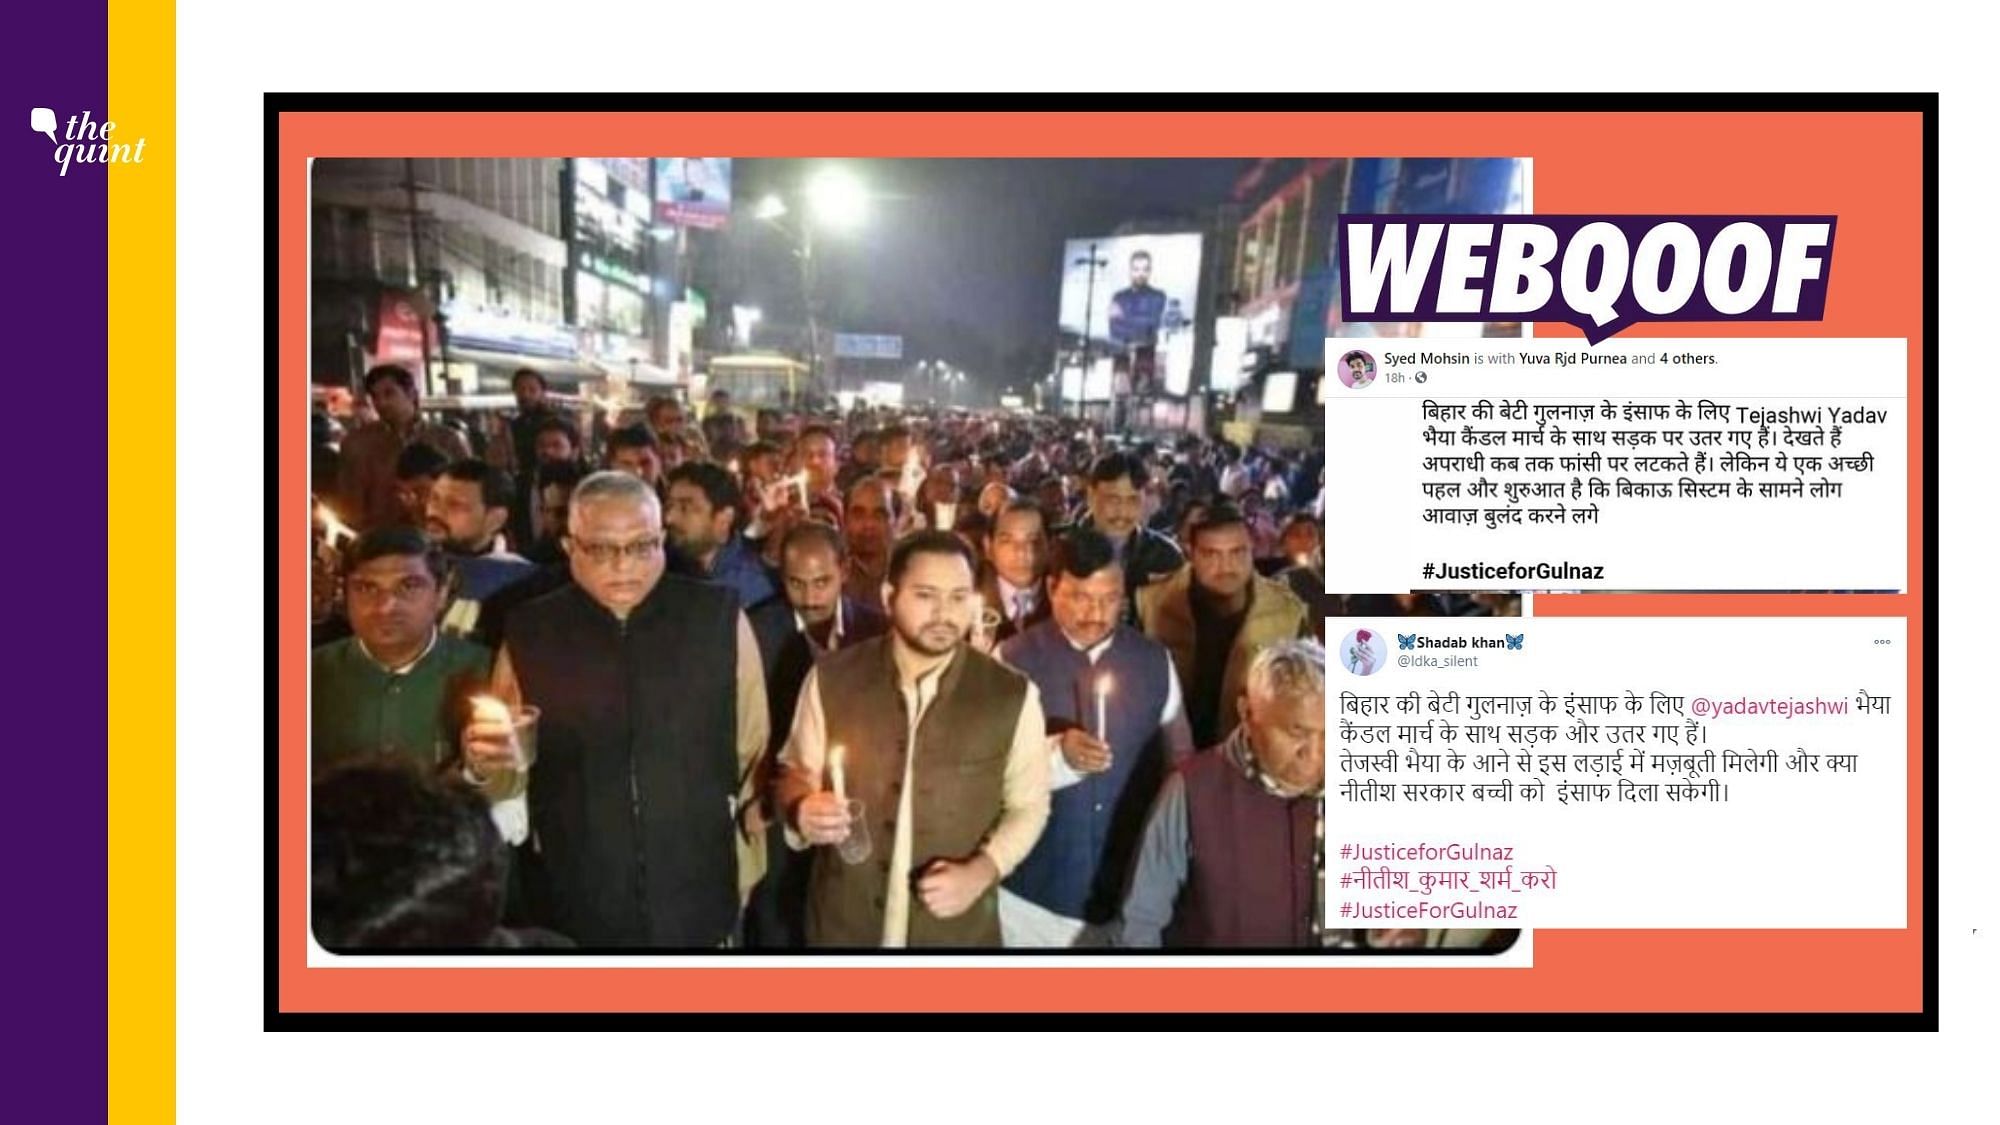 A photograph of Rashtriya Janata Dal (RJD) leader Tejashwi Yadav participating in a candle march in 2018 has gone viral on social media with a false claim.